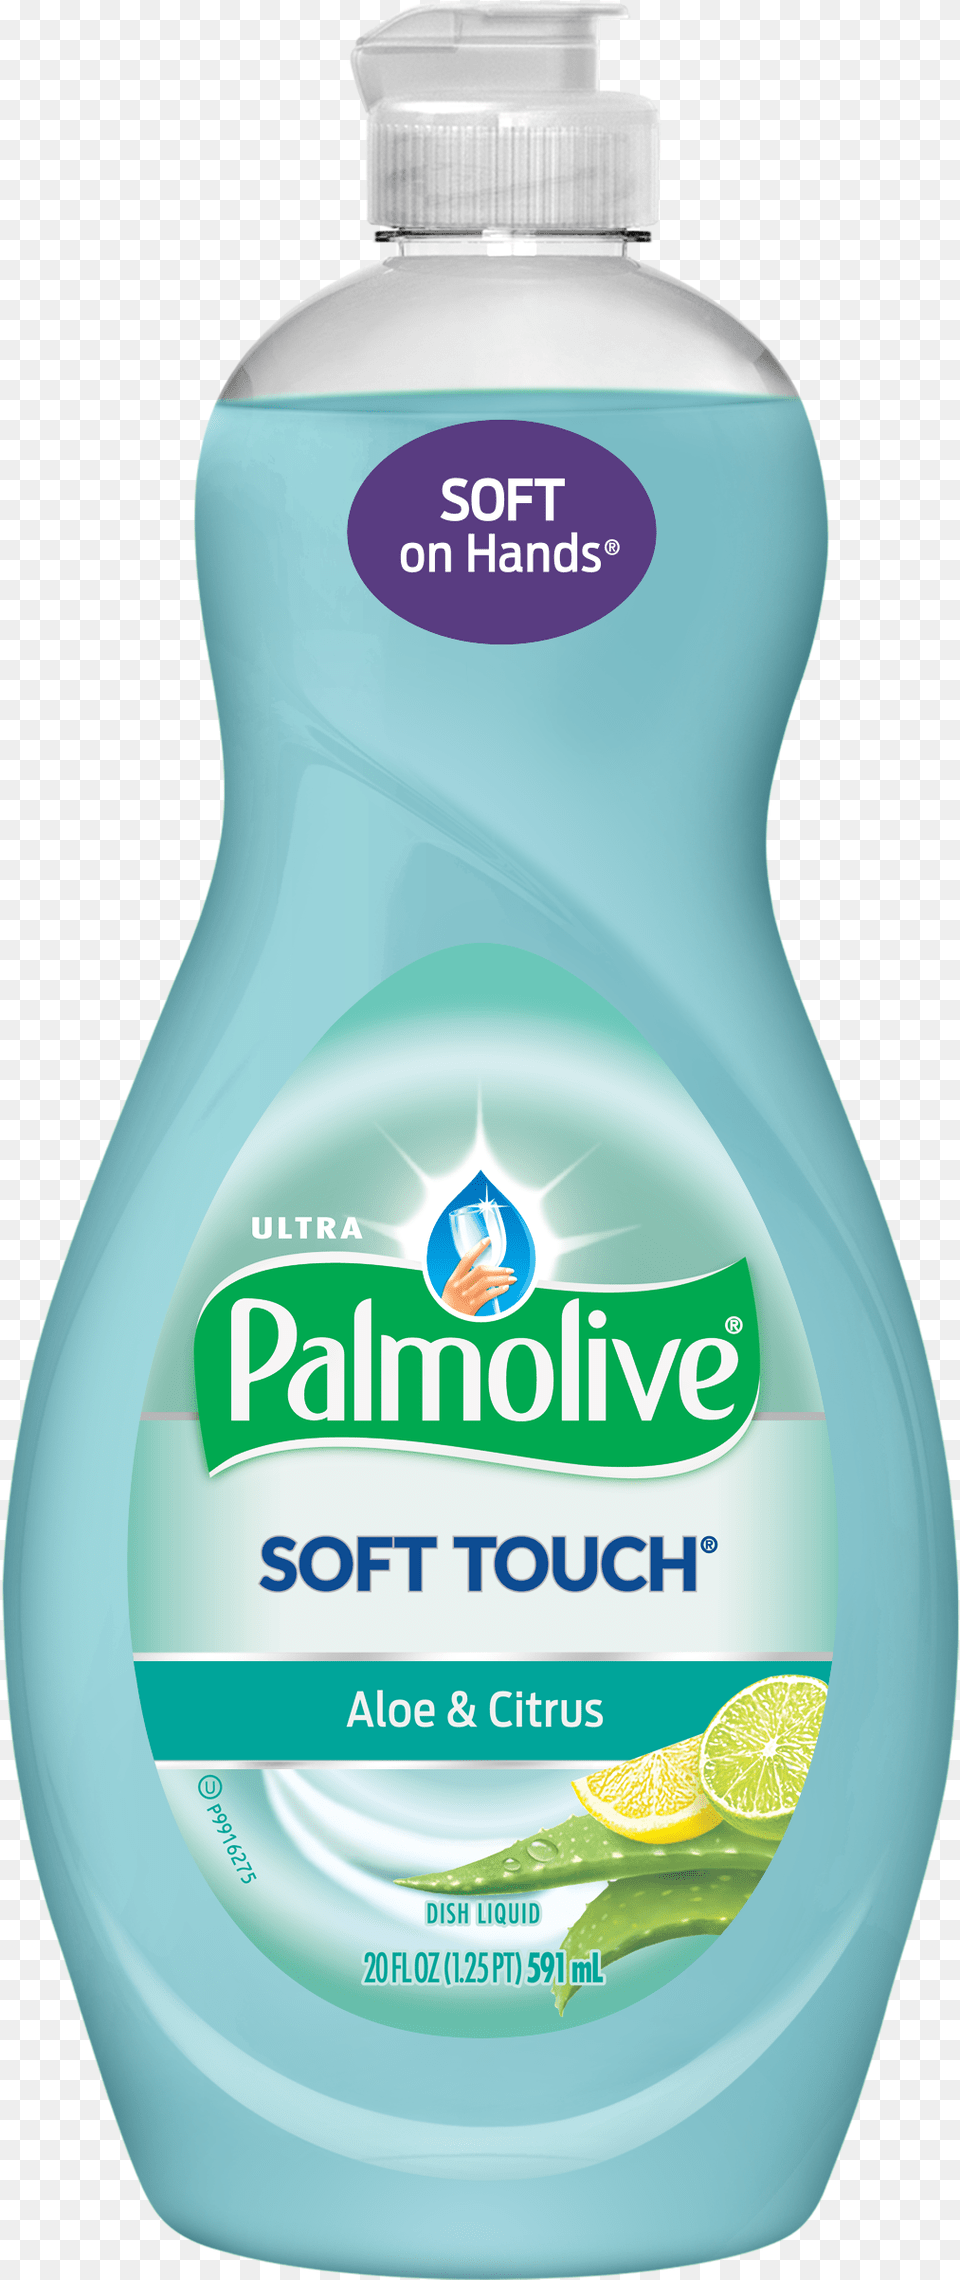 Palmolive Ultra Soft Touch Liquid Dish Soap Aloe And Palmolive Soft Touch Dish Soap, Bottle, Lotion, Food, Ketchup Free Png Download